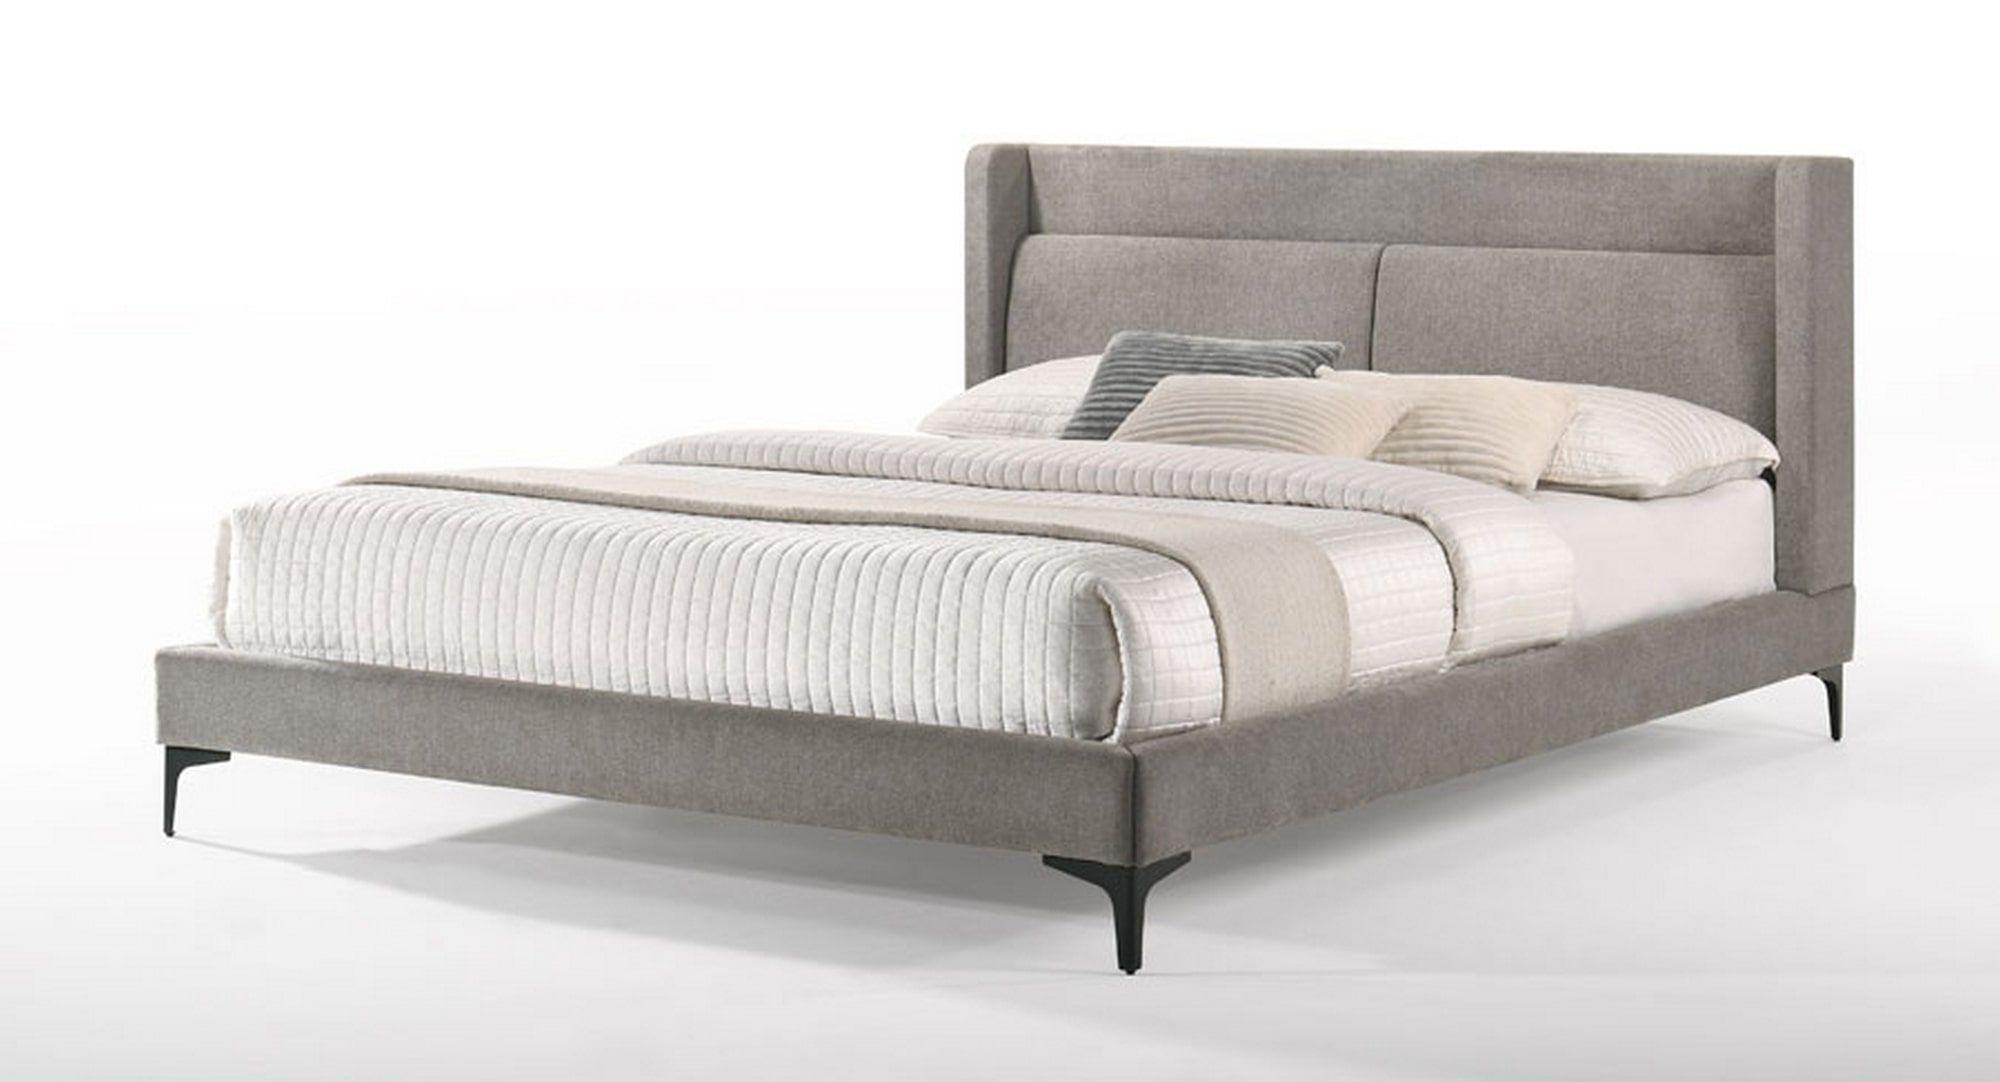 Contemporary, Modern Panel Bed VGMABR-103 VGMABR-103 77562A in Gray Fabric